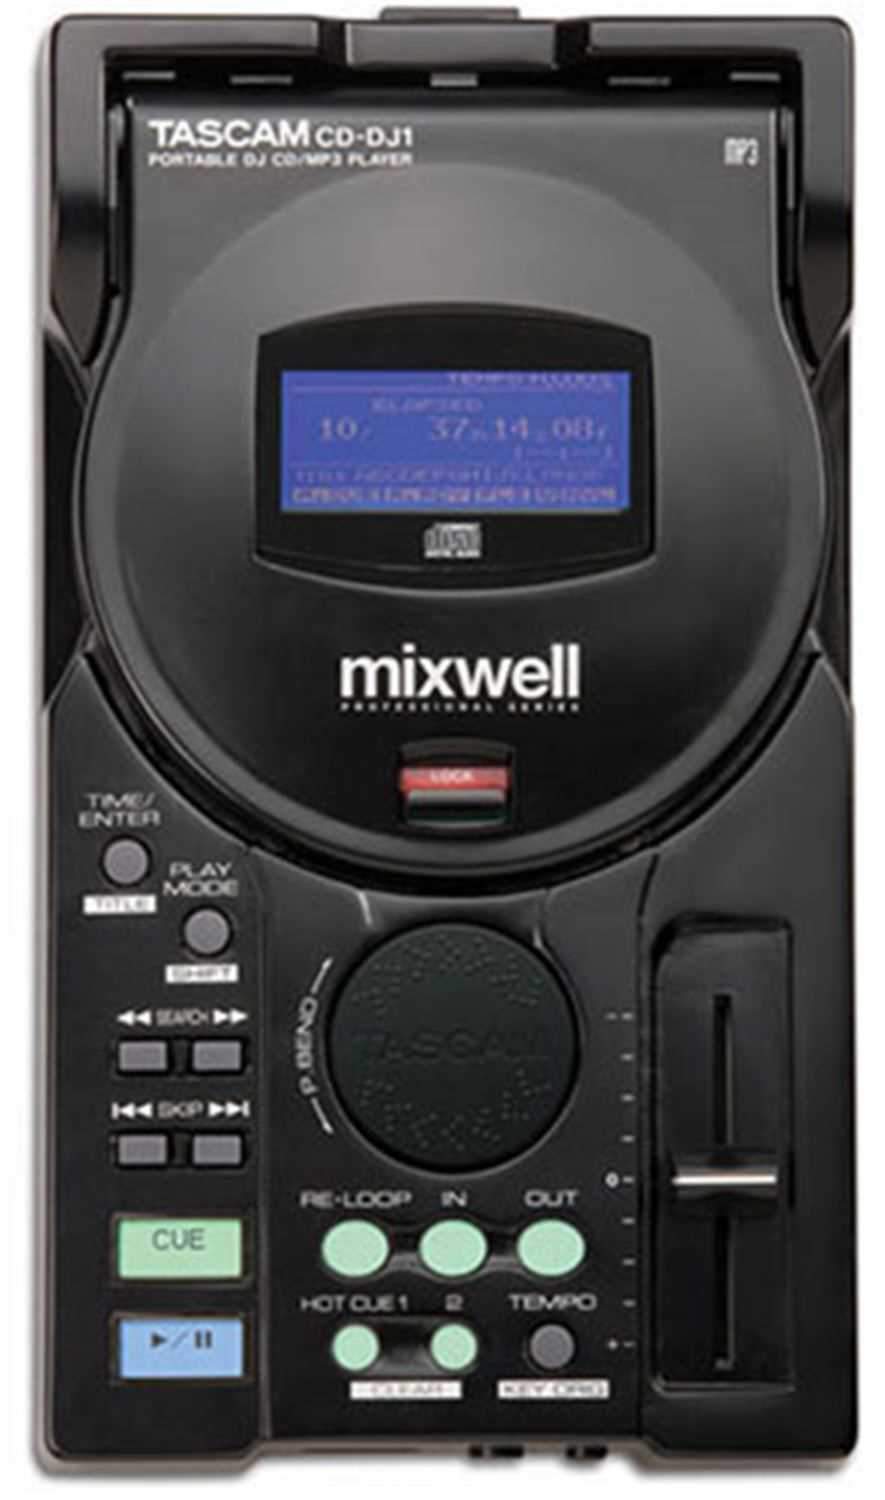 Tascam Mixwell CD-DJ1 Table Top DJ CD Player with Mp3 - ProSound and Stage Lighting